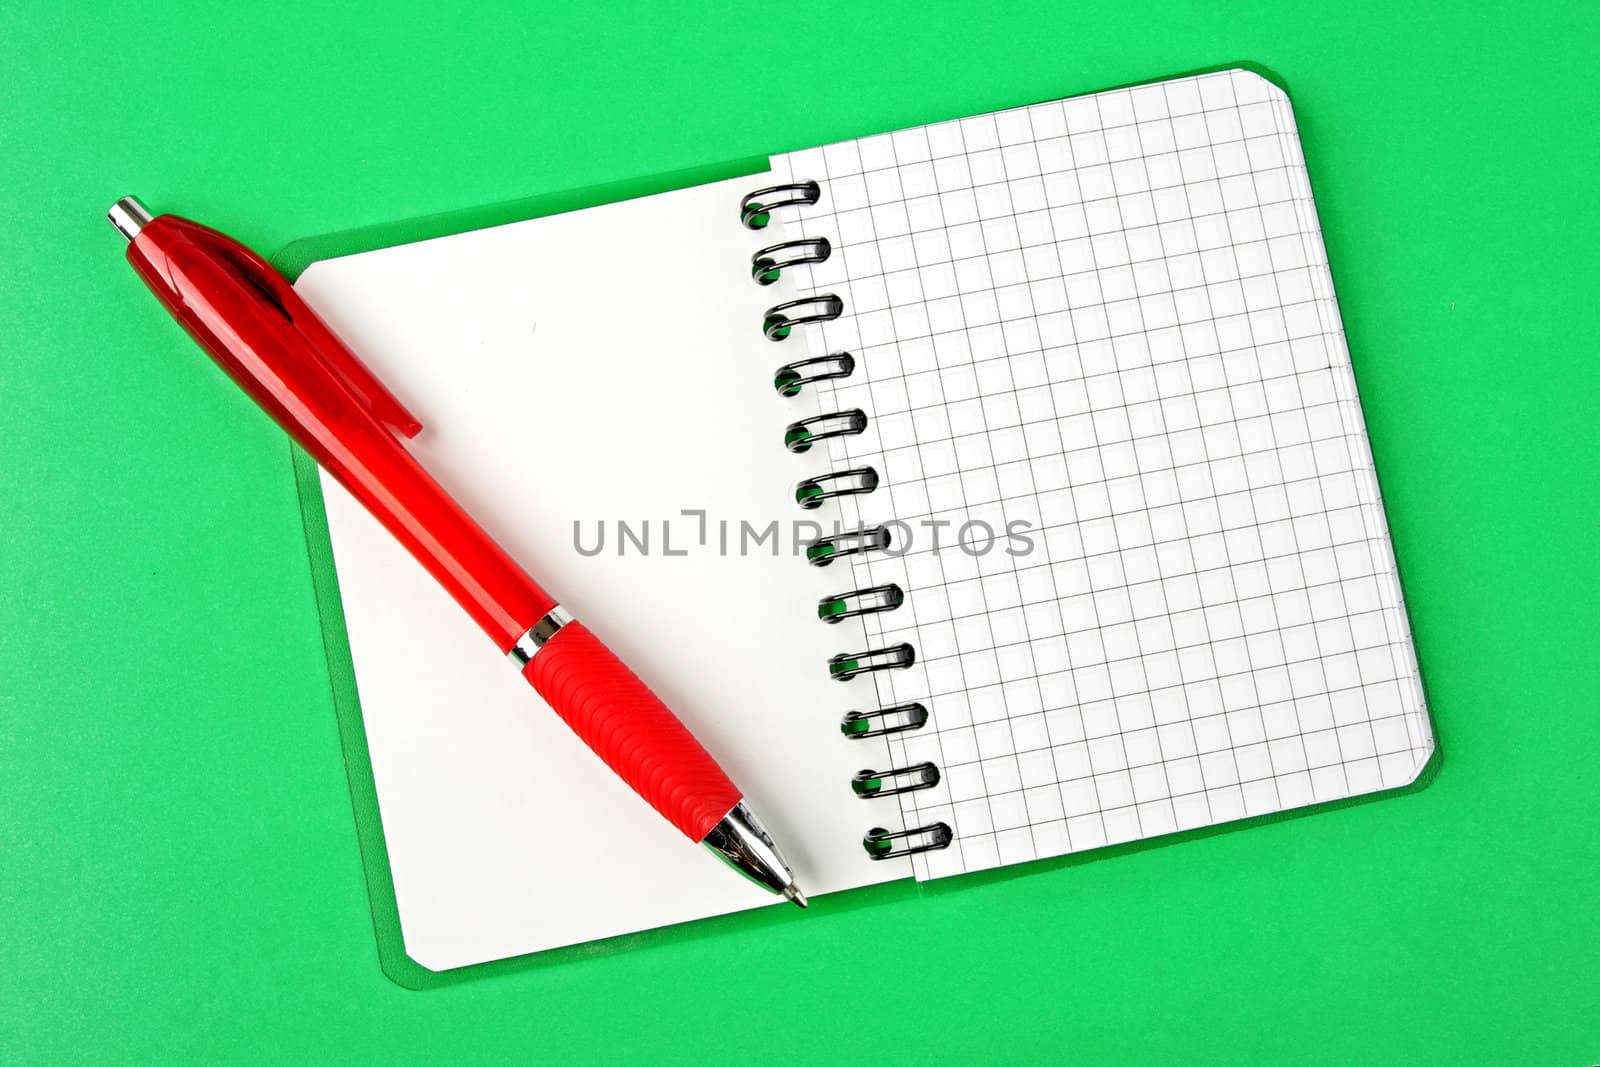 Opened notebook squared pagewith red pen over it on green background 